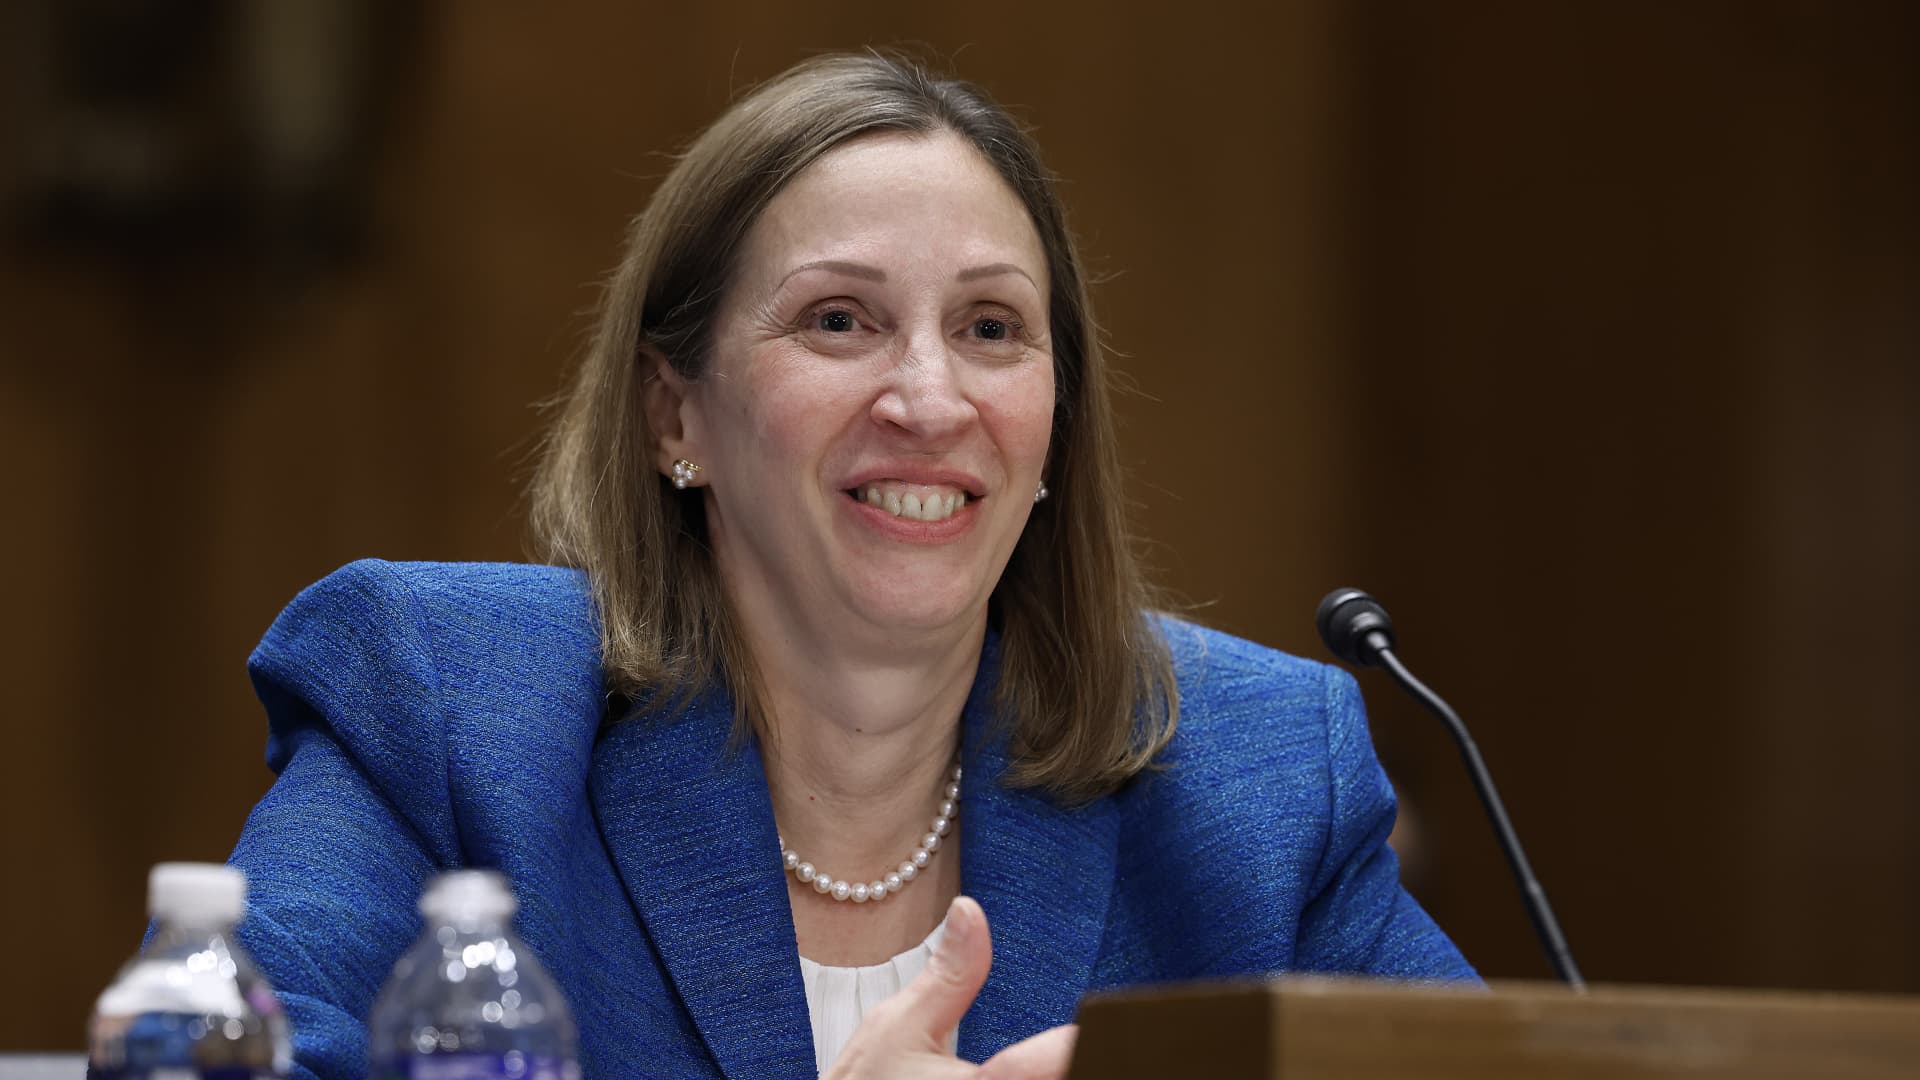 U.S. Ambassador to Armenia Lynne Tracy testifies before the Senate Foreign Relations Committee during her confirmation hearing to be the next ambassador to Russia in the Dirksen Senate Office Building on Capitol Hill on November 30, 2022 in Washington, DC.